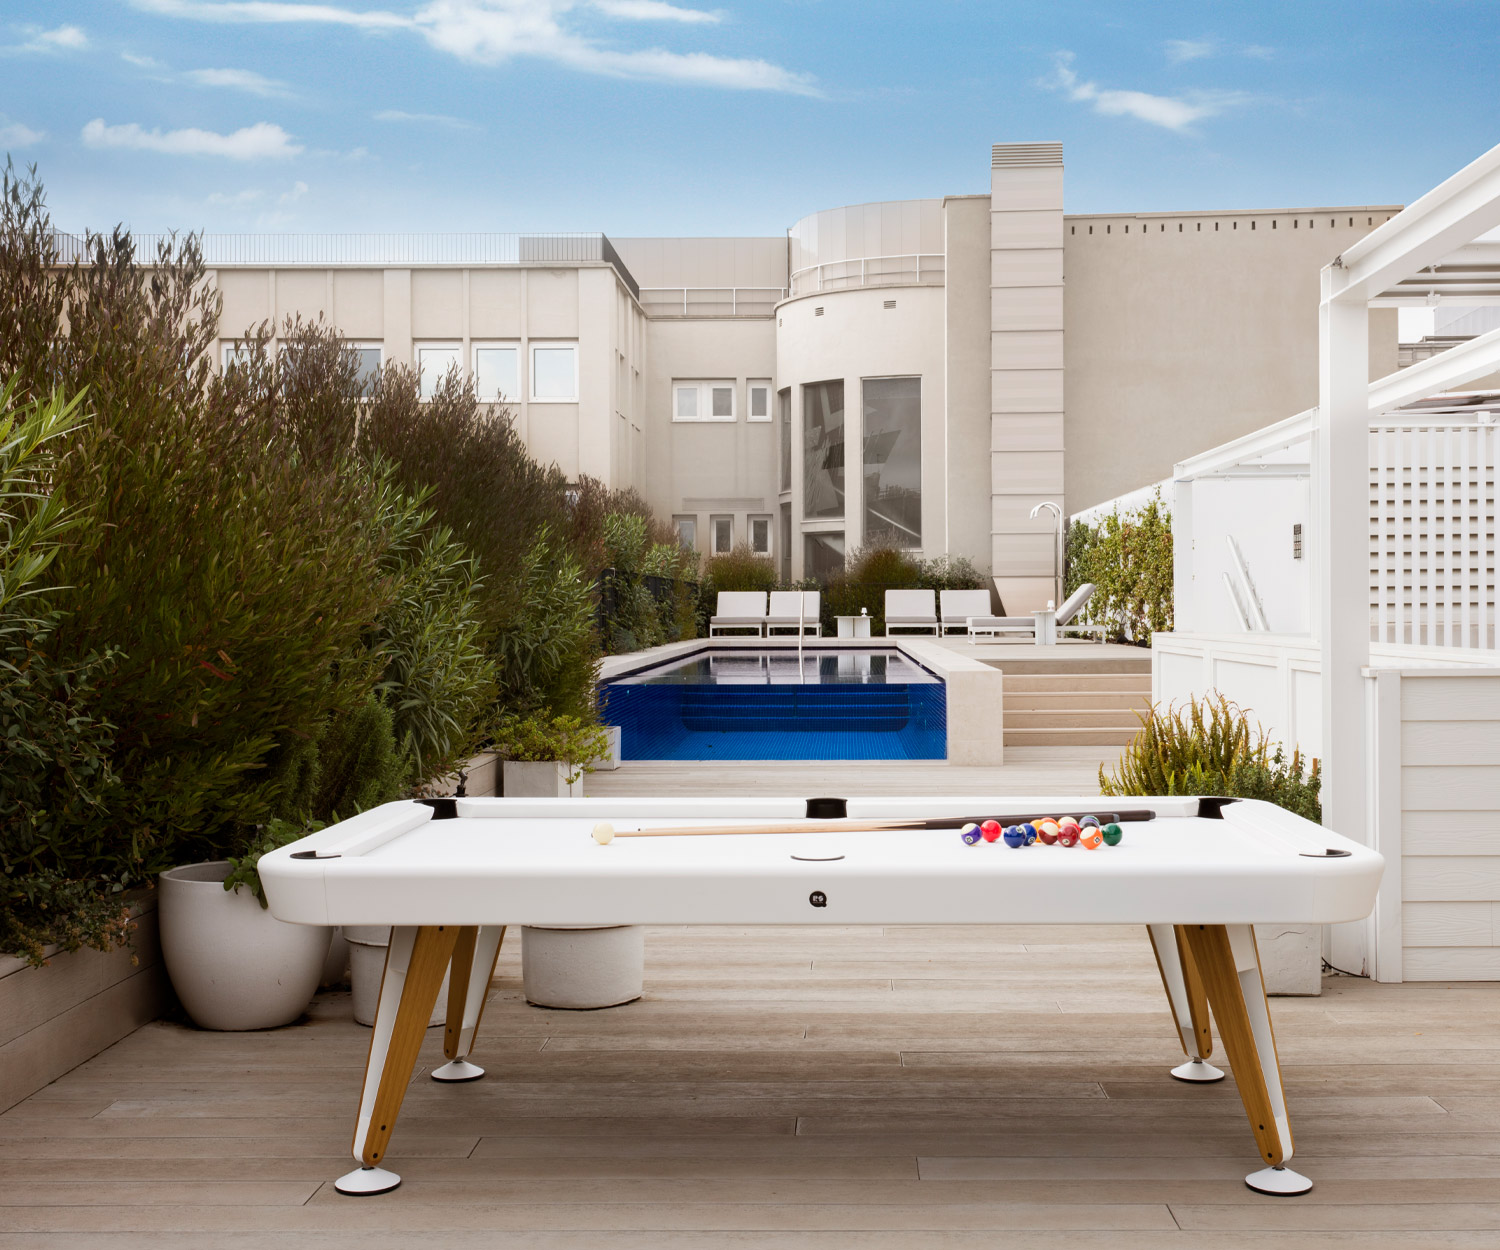 White table for billiards outside on stone terrace